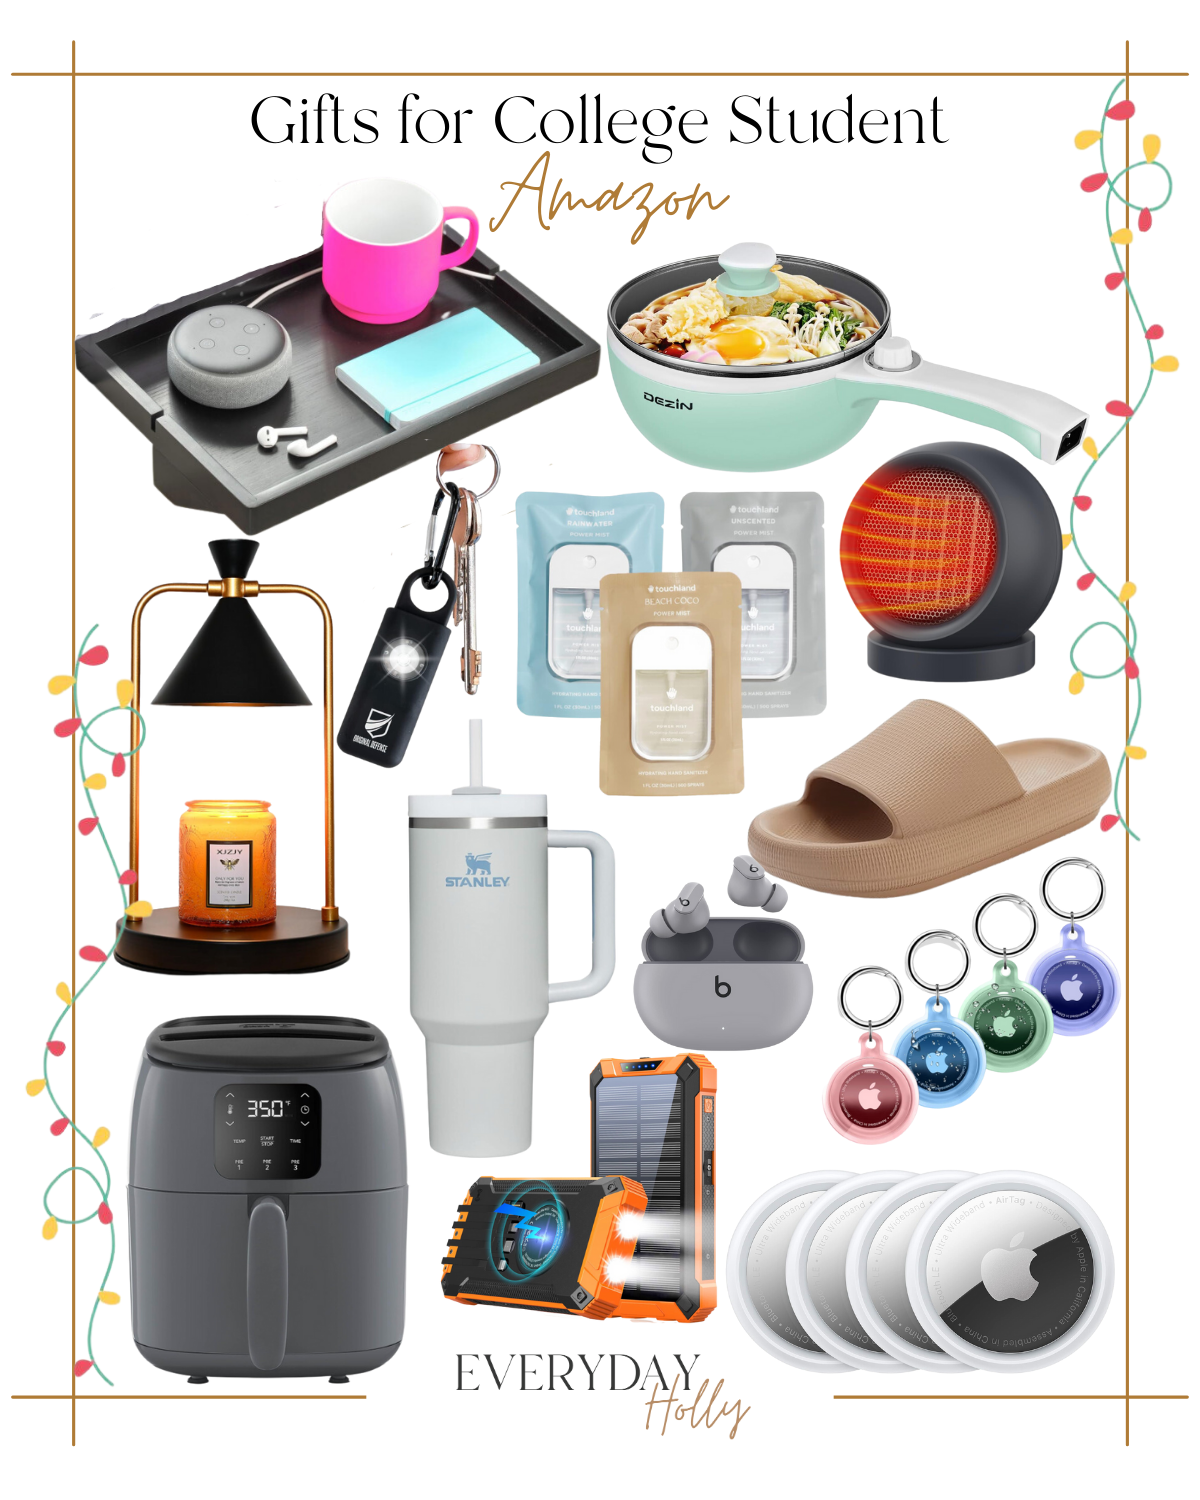 10 Holiday Gift Guides for Everyone This Season | #holiday #giftguide #giftideas #2023 #christmas #gifts #amazon #bedshelf #cooking #candle #selfdefense #touchland #desktopheater #slipper #airtag #airfryer #stanley #headphones